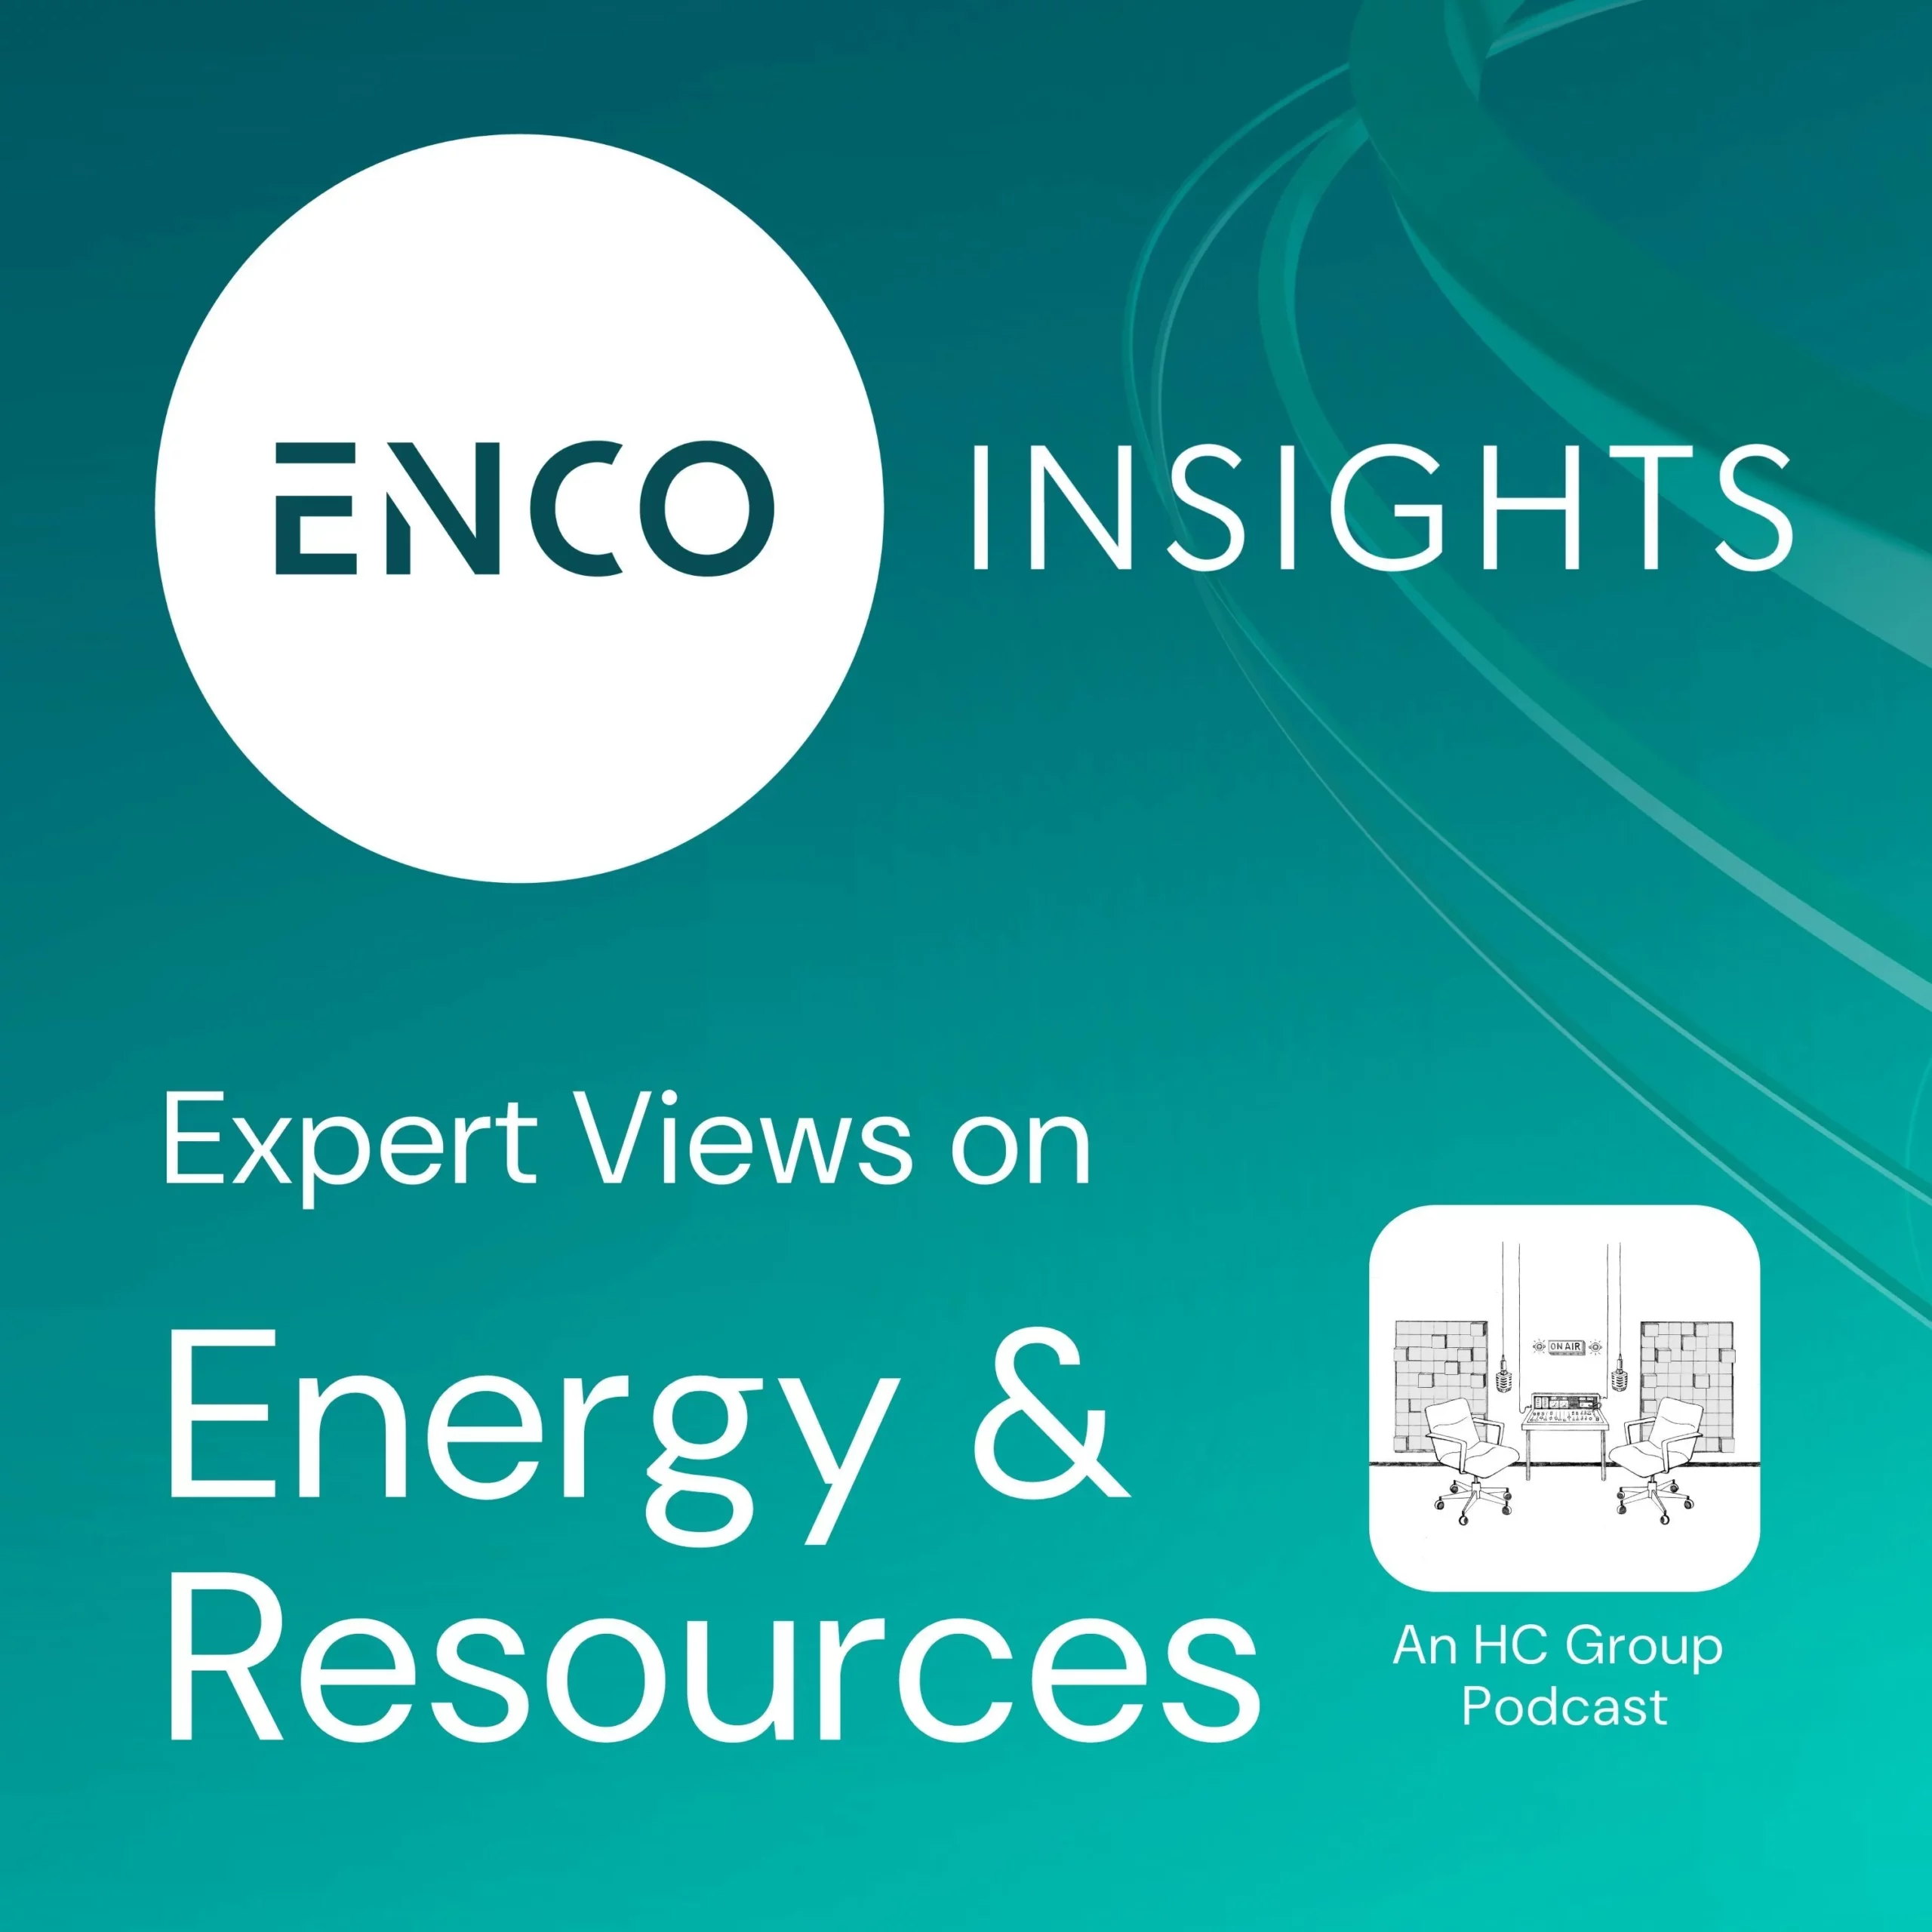 Enco Insights: Commodity Traders Transacting in Stablecoins